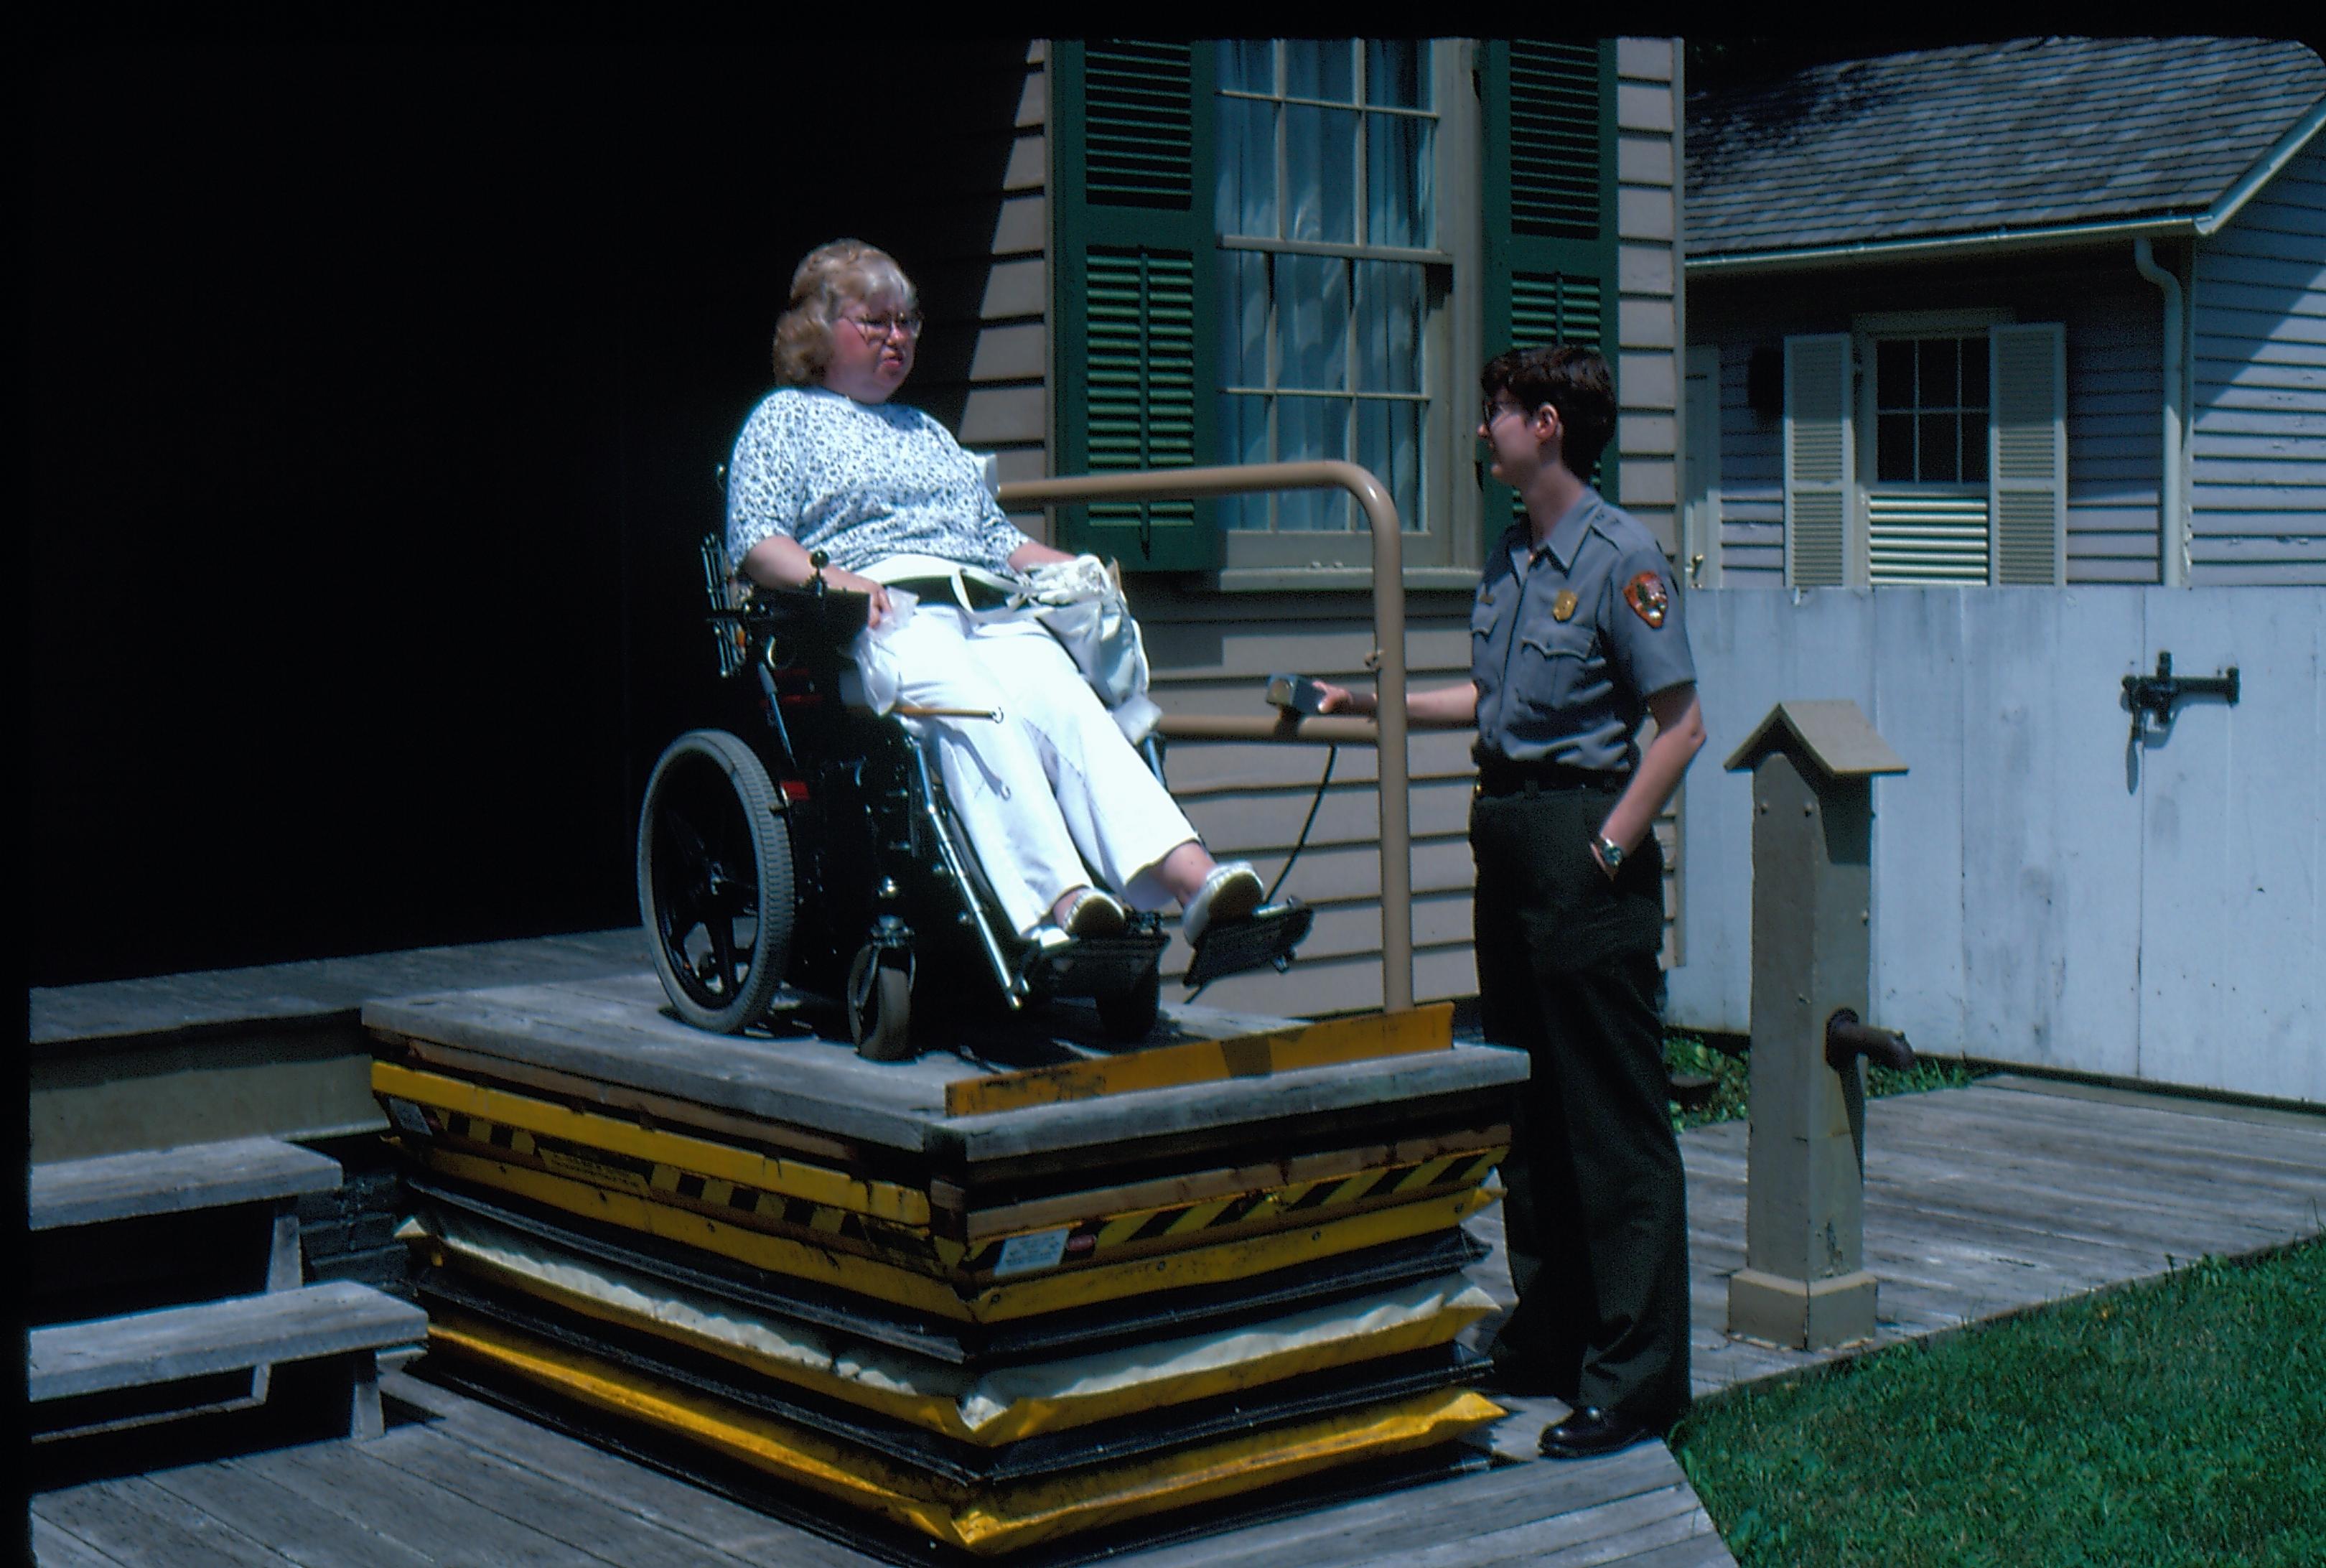 Lincoln Home wheelchair lift fully extended, with one handrail missing. One woman in wheelchair on lift. Staff member Cathy Mancuso at ground level using lift controls. Corneau house in background. Photographer facing north west